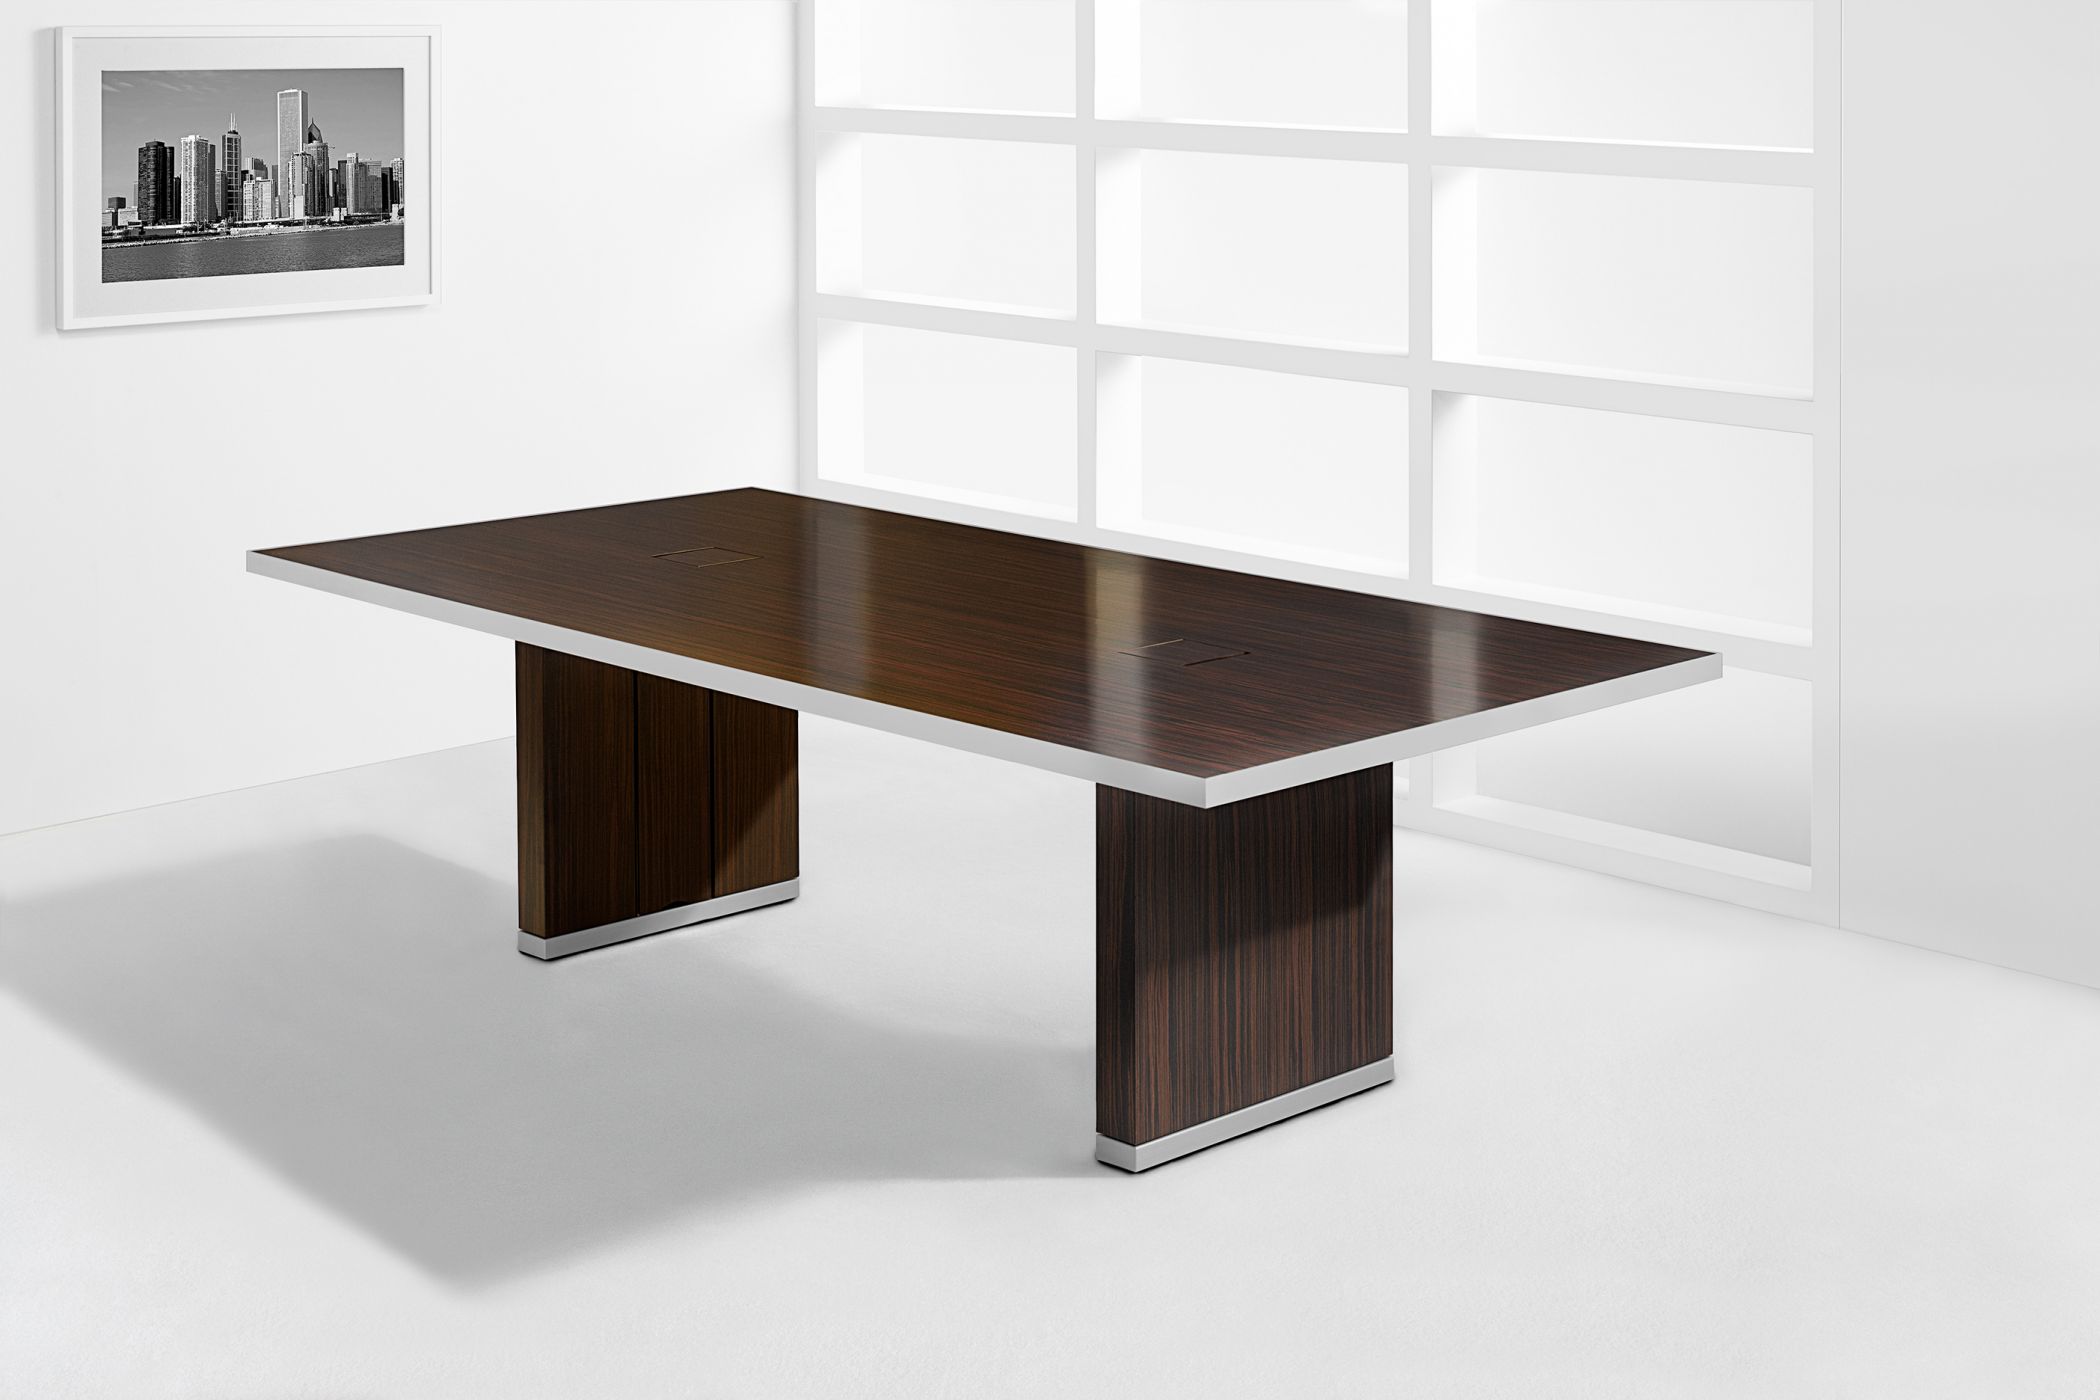 Mobile tables are available in any wood veneer and a range of metal finishes. 